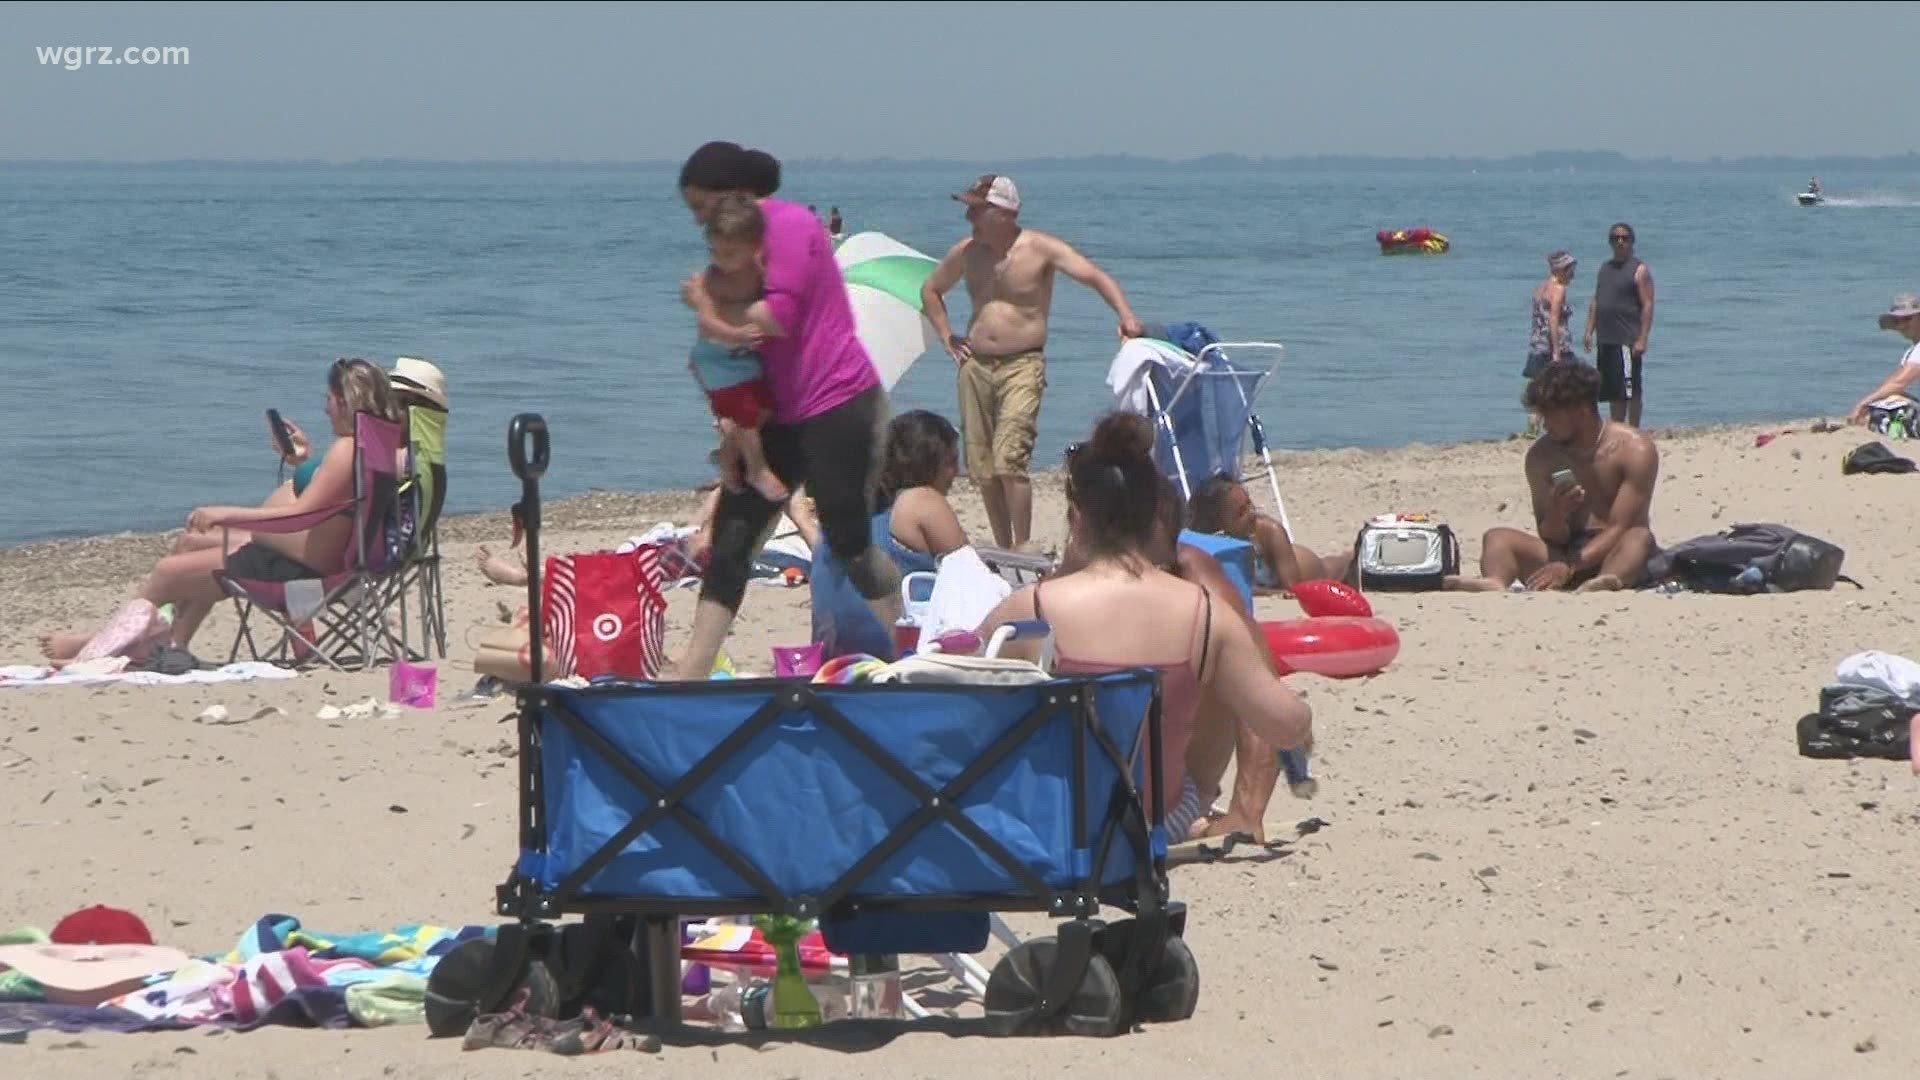 Governor Cuomo says the goal is to reach 100 percent capacity at beaches and pools by Independence Day.